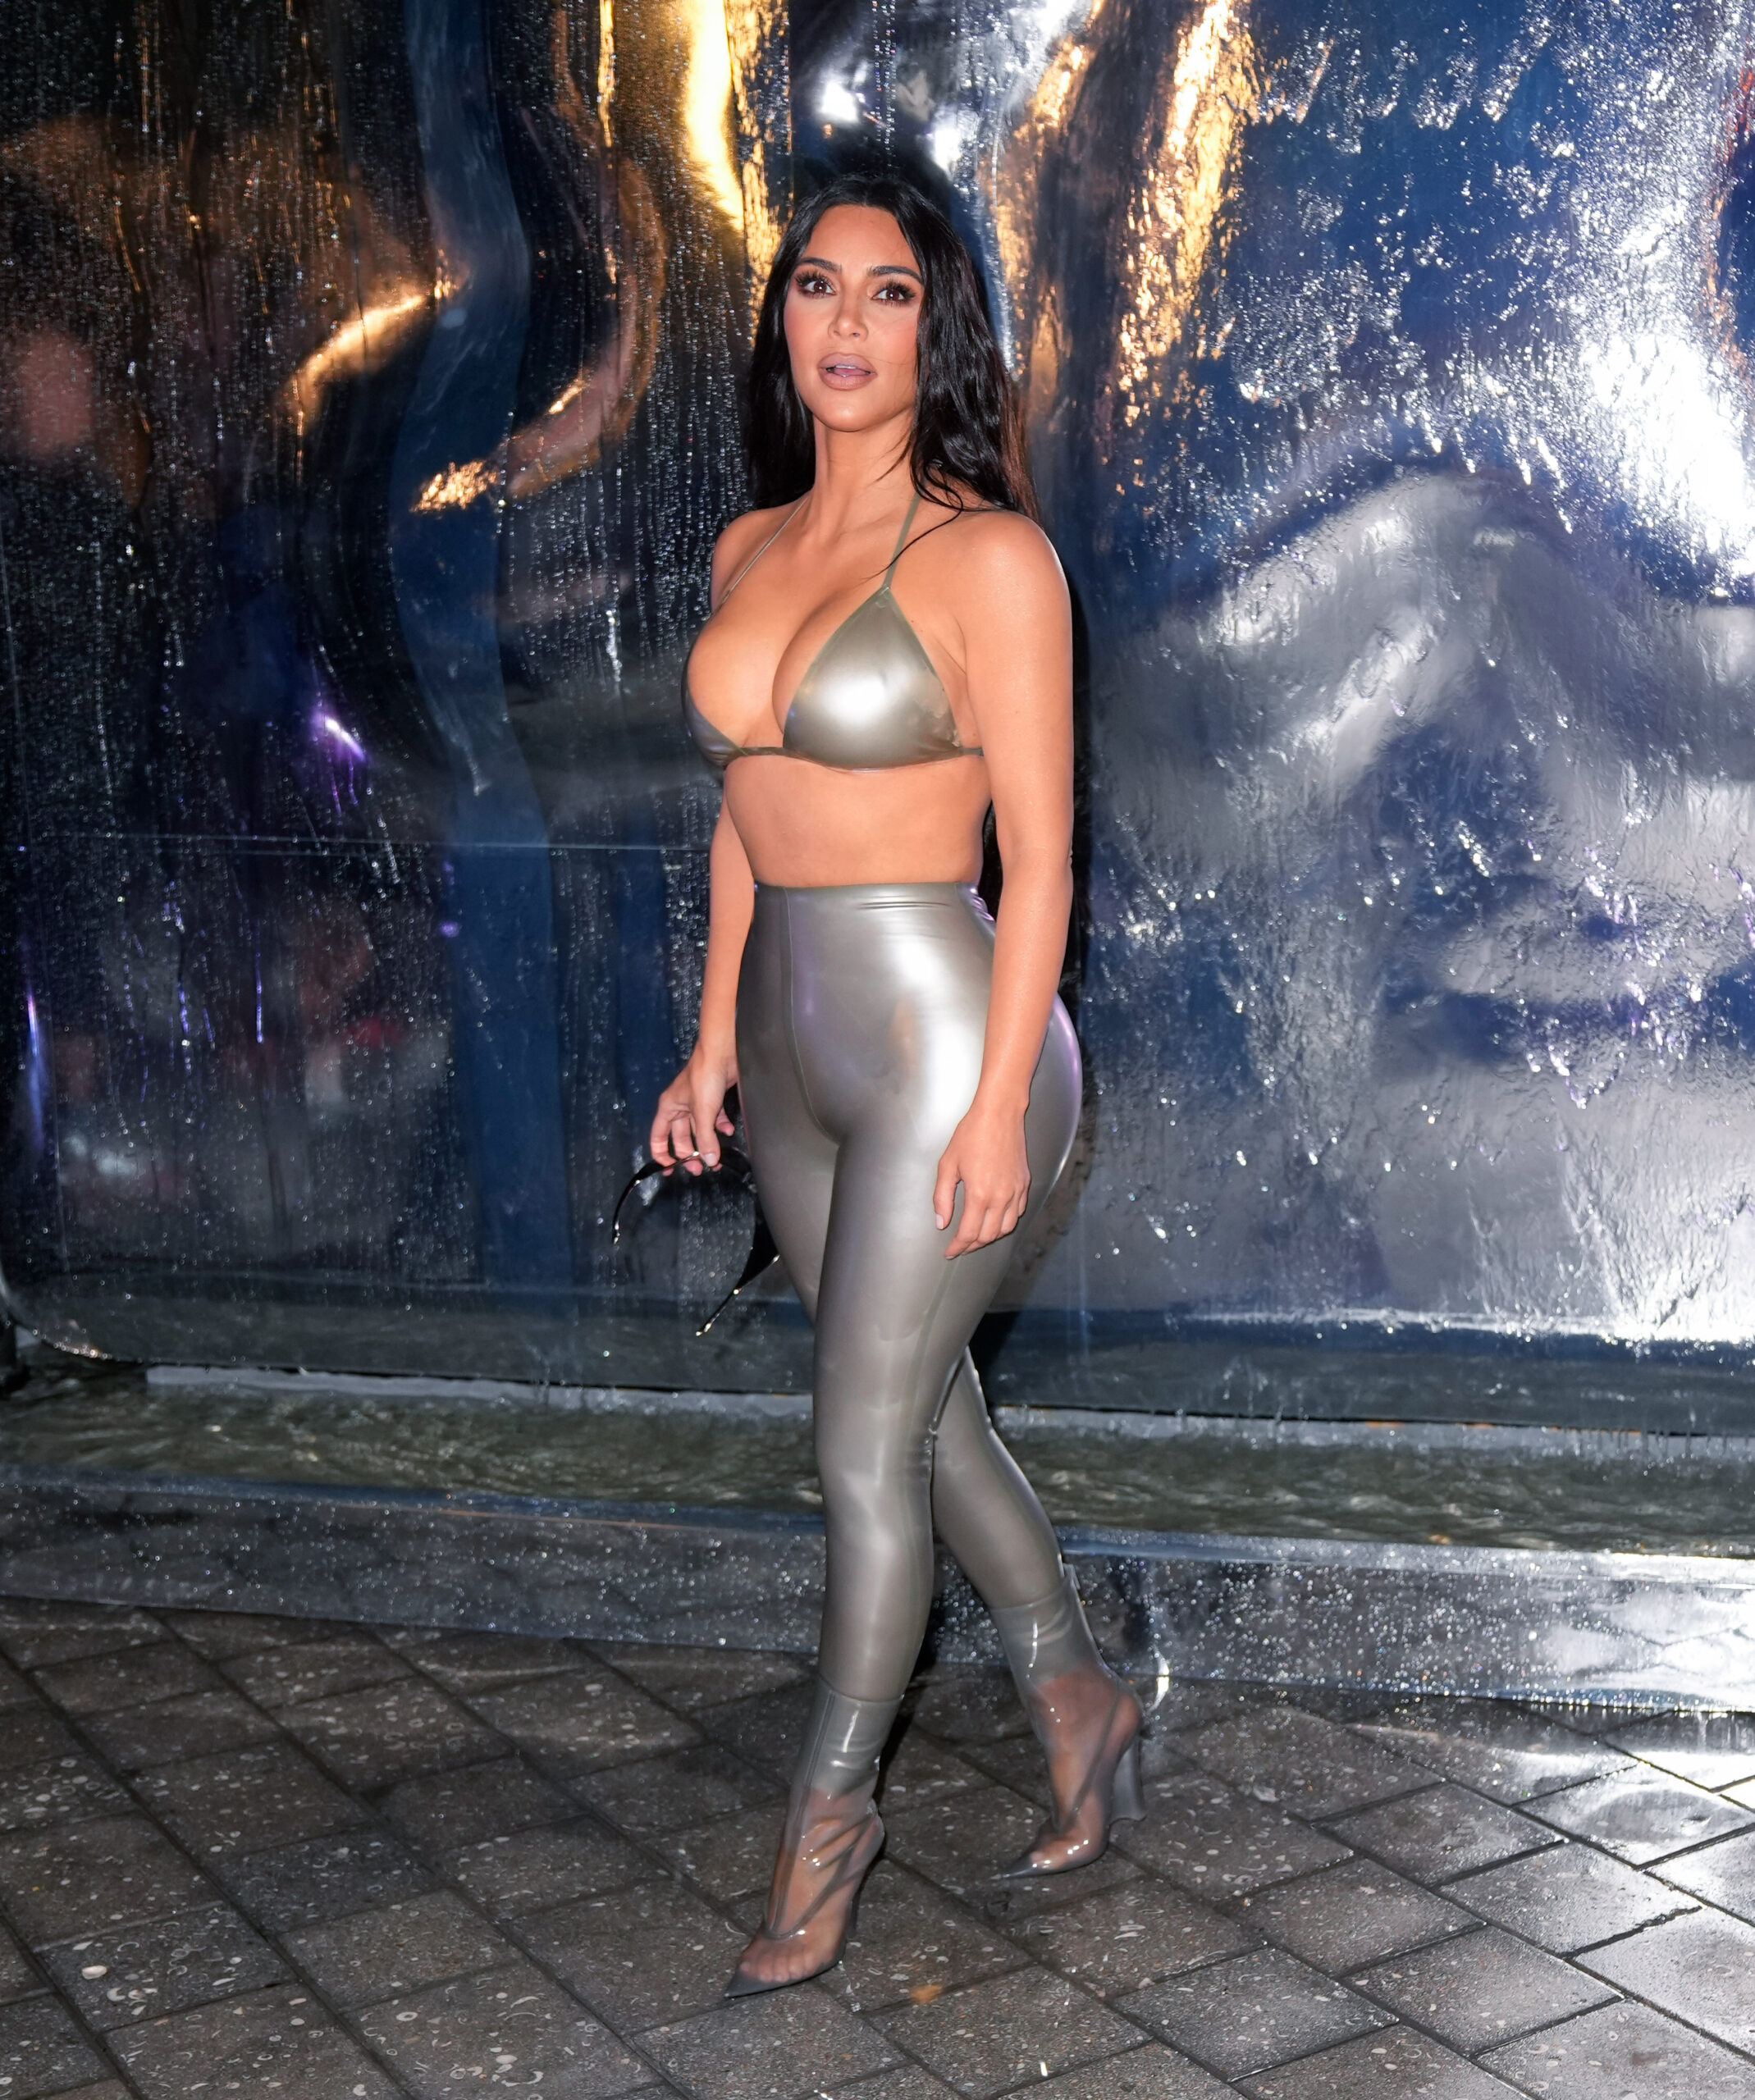 MIAMI, FLORIDA - MARCH 19: Kim Kardashian visits the SKIMS SWIM Miami pop-up shop on Saturday, March 19, 2022 in Miami, Florida. (Photo by J. Lee/Getty Images for ABA)